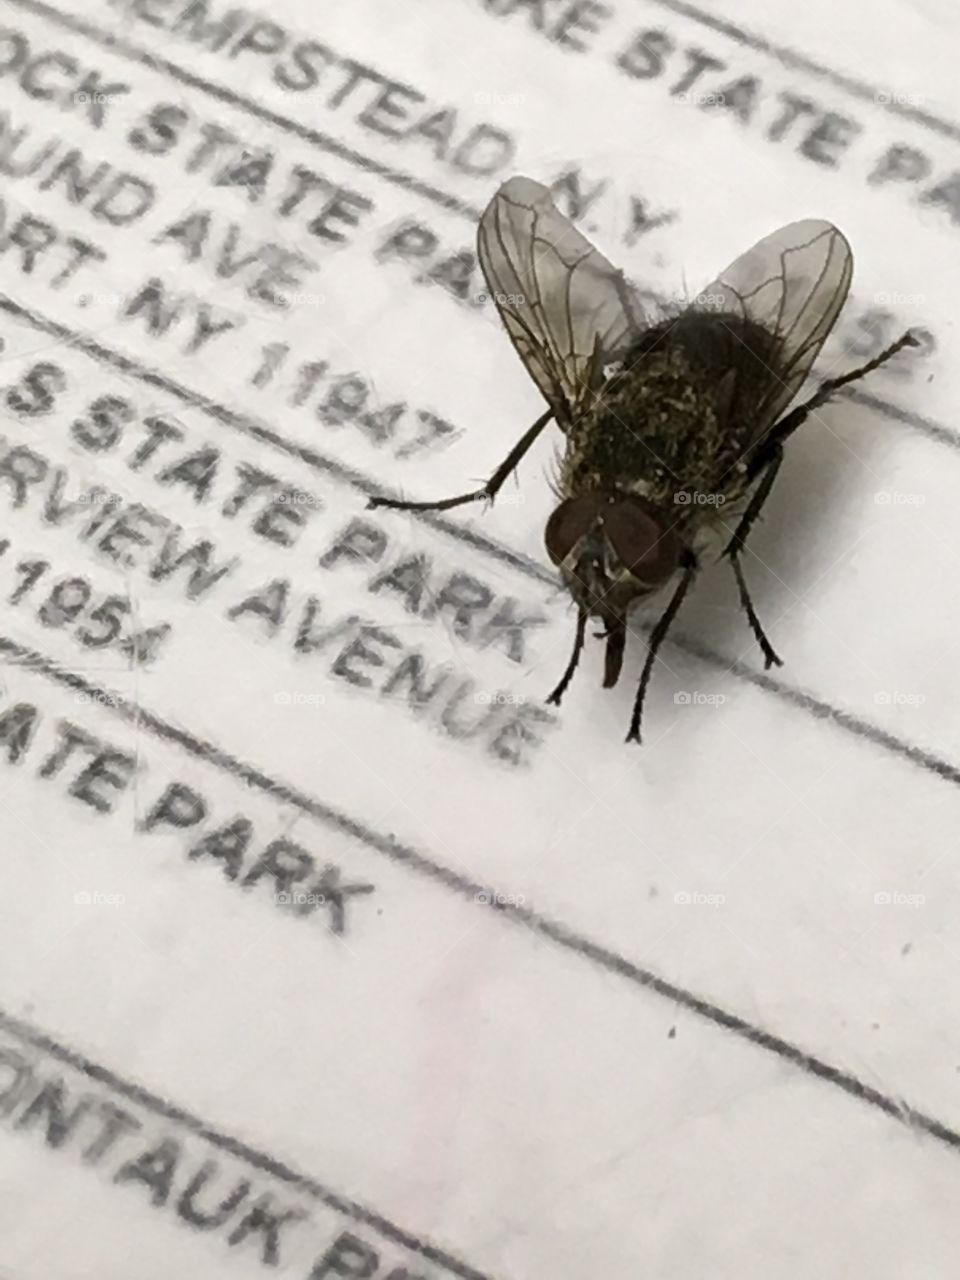 This fly has been hanging out and walking all over my desk for about an hour now...it isn’t even afraid of me! Did it forget how to fly away? Lol